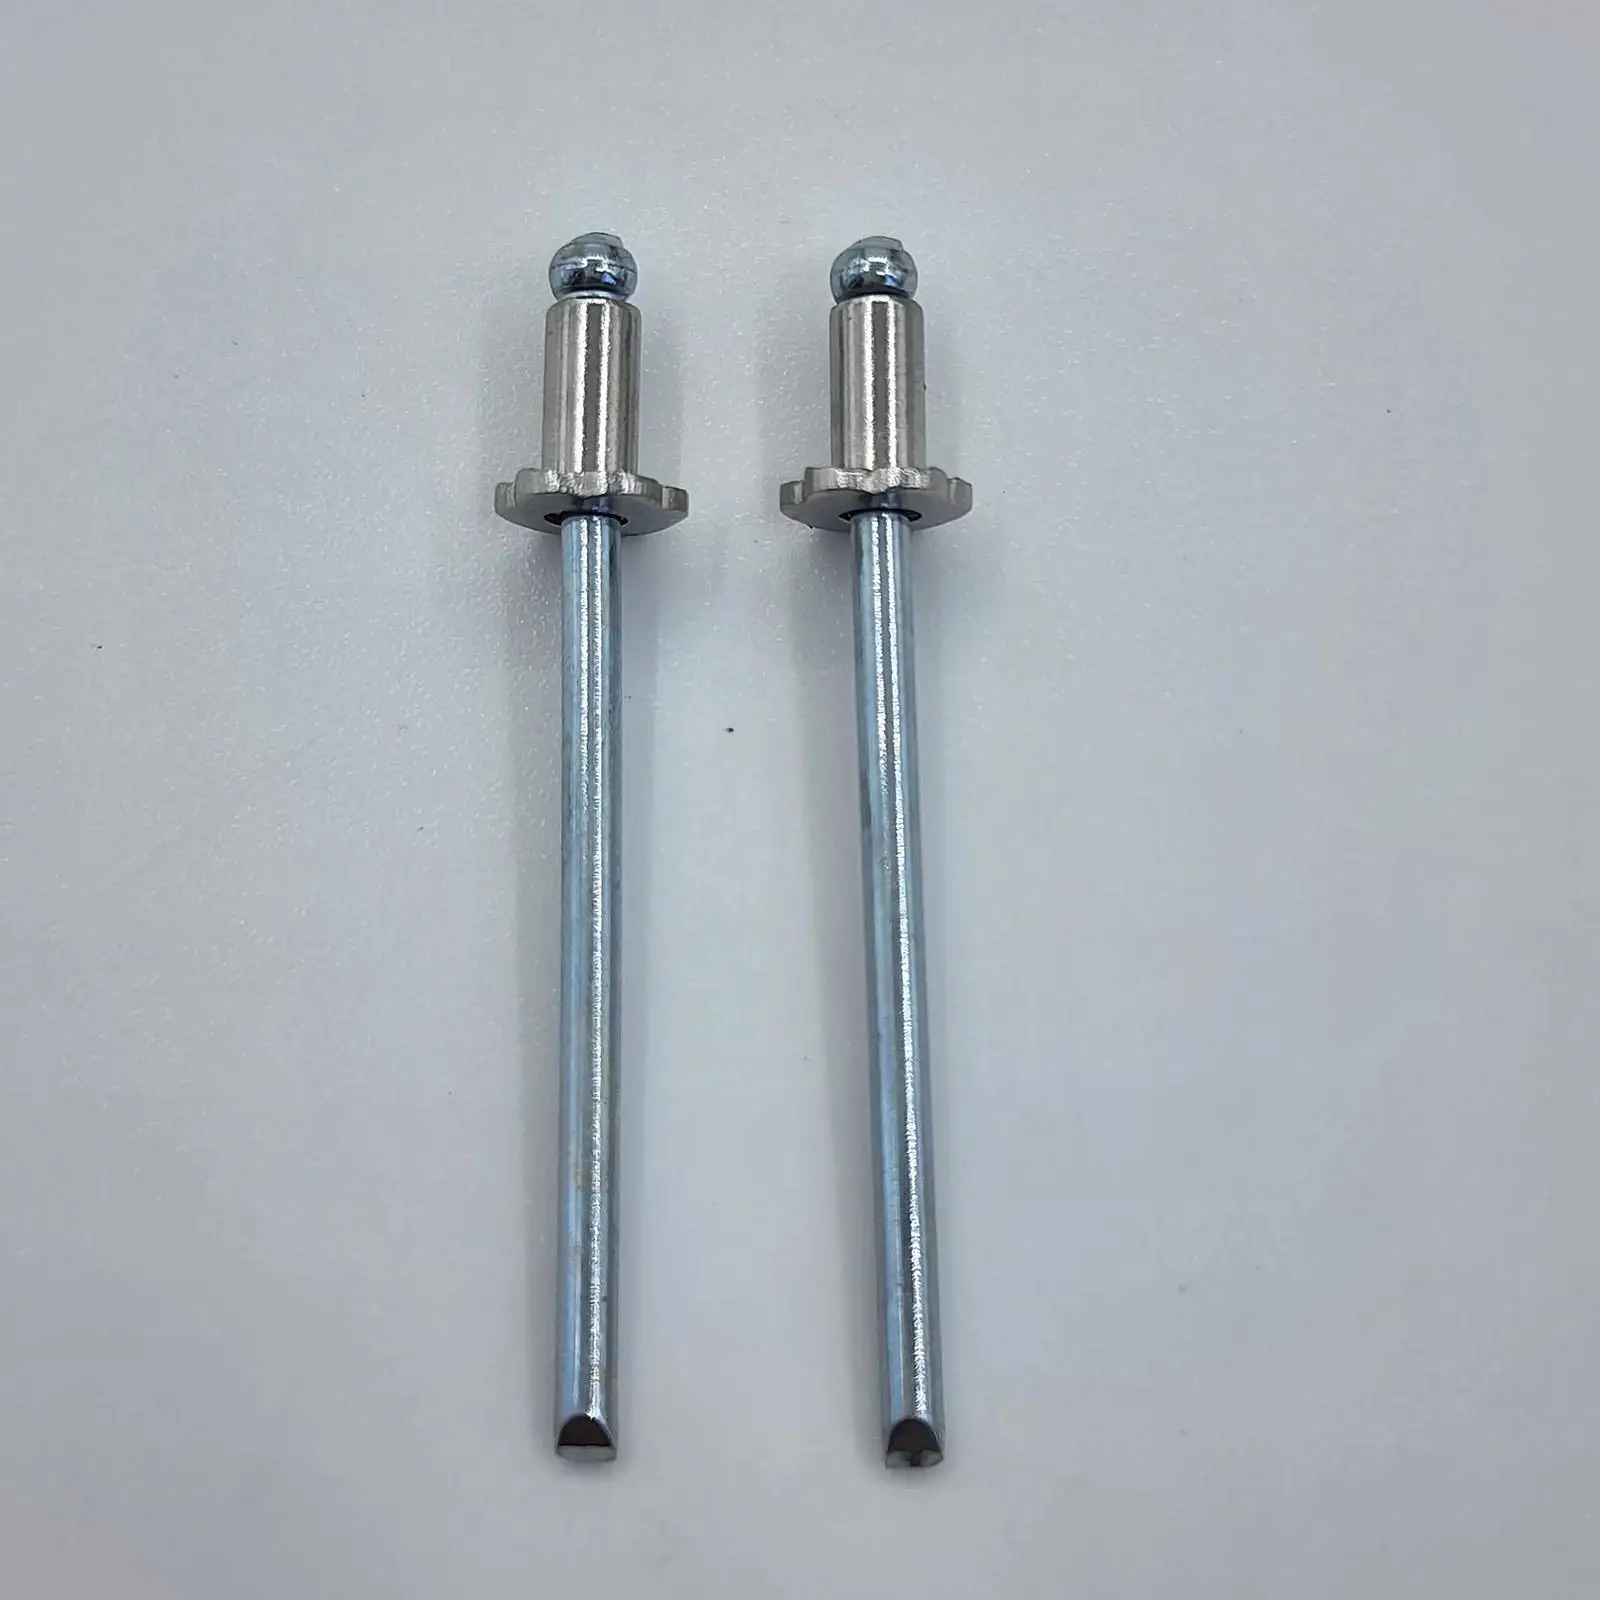 2 Pieces Stainless Steel Rosette Rivets Universal Door Tag Rivets Bolt Replacement Accessory Durable Easy Installation